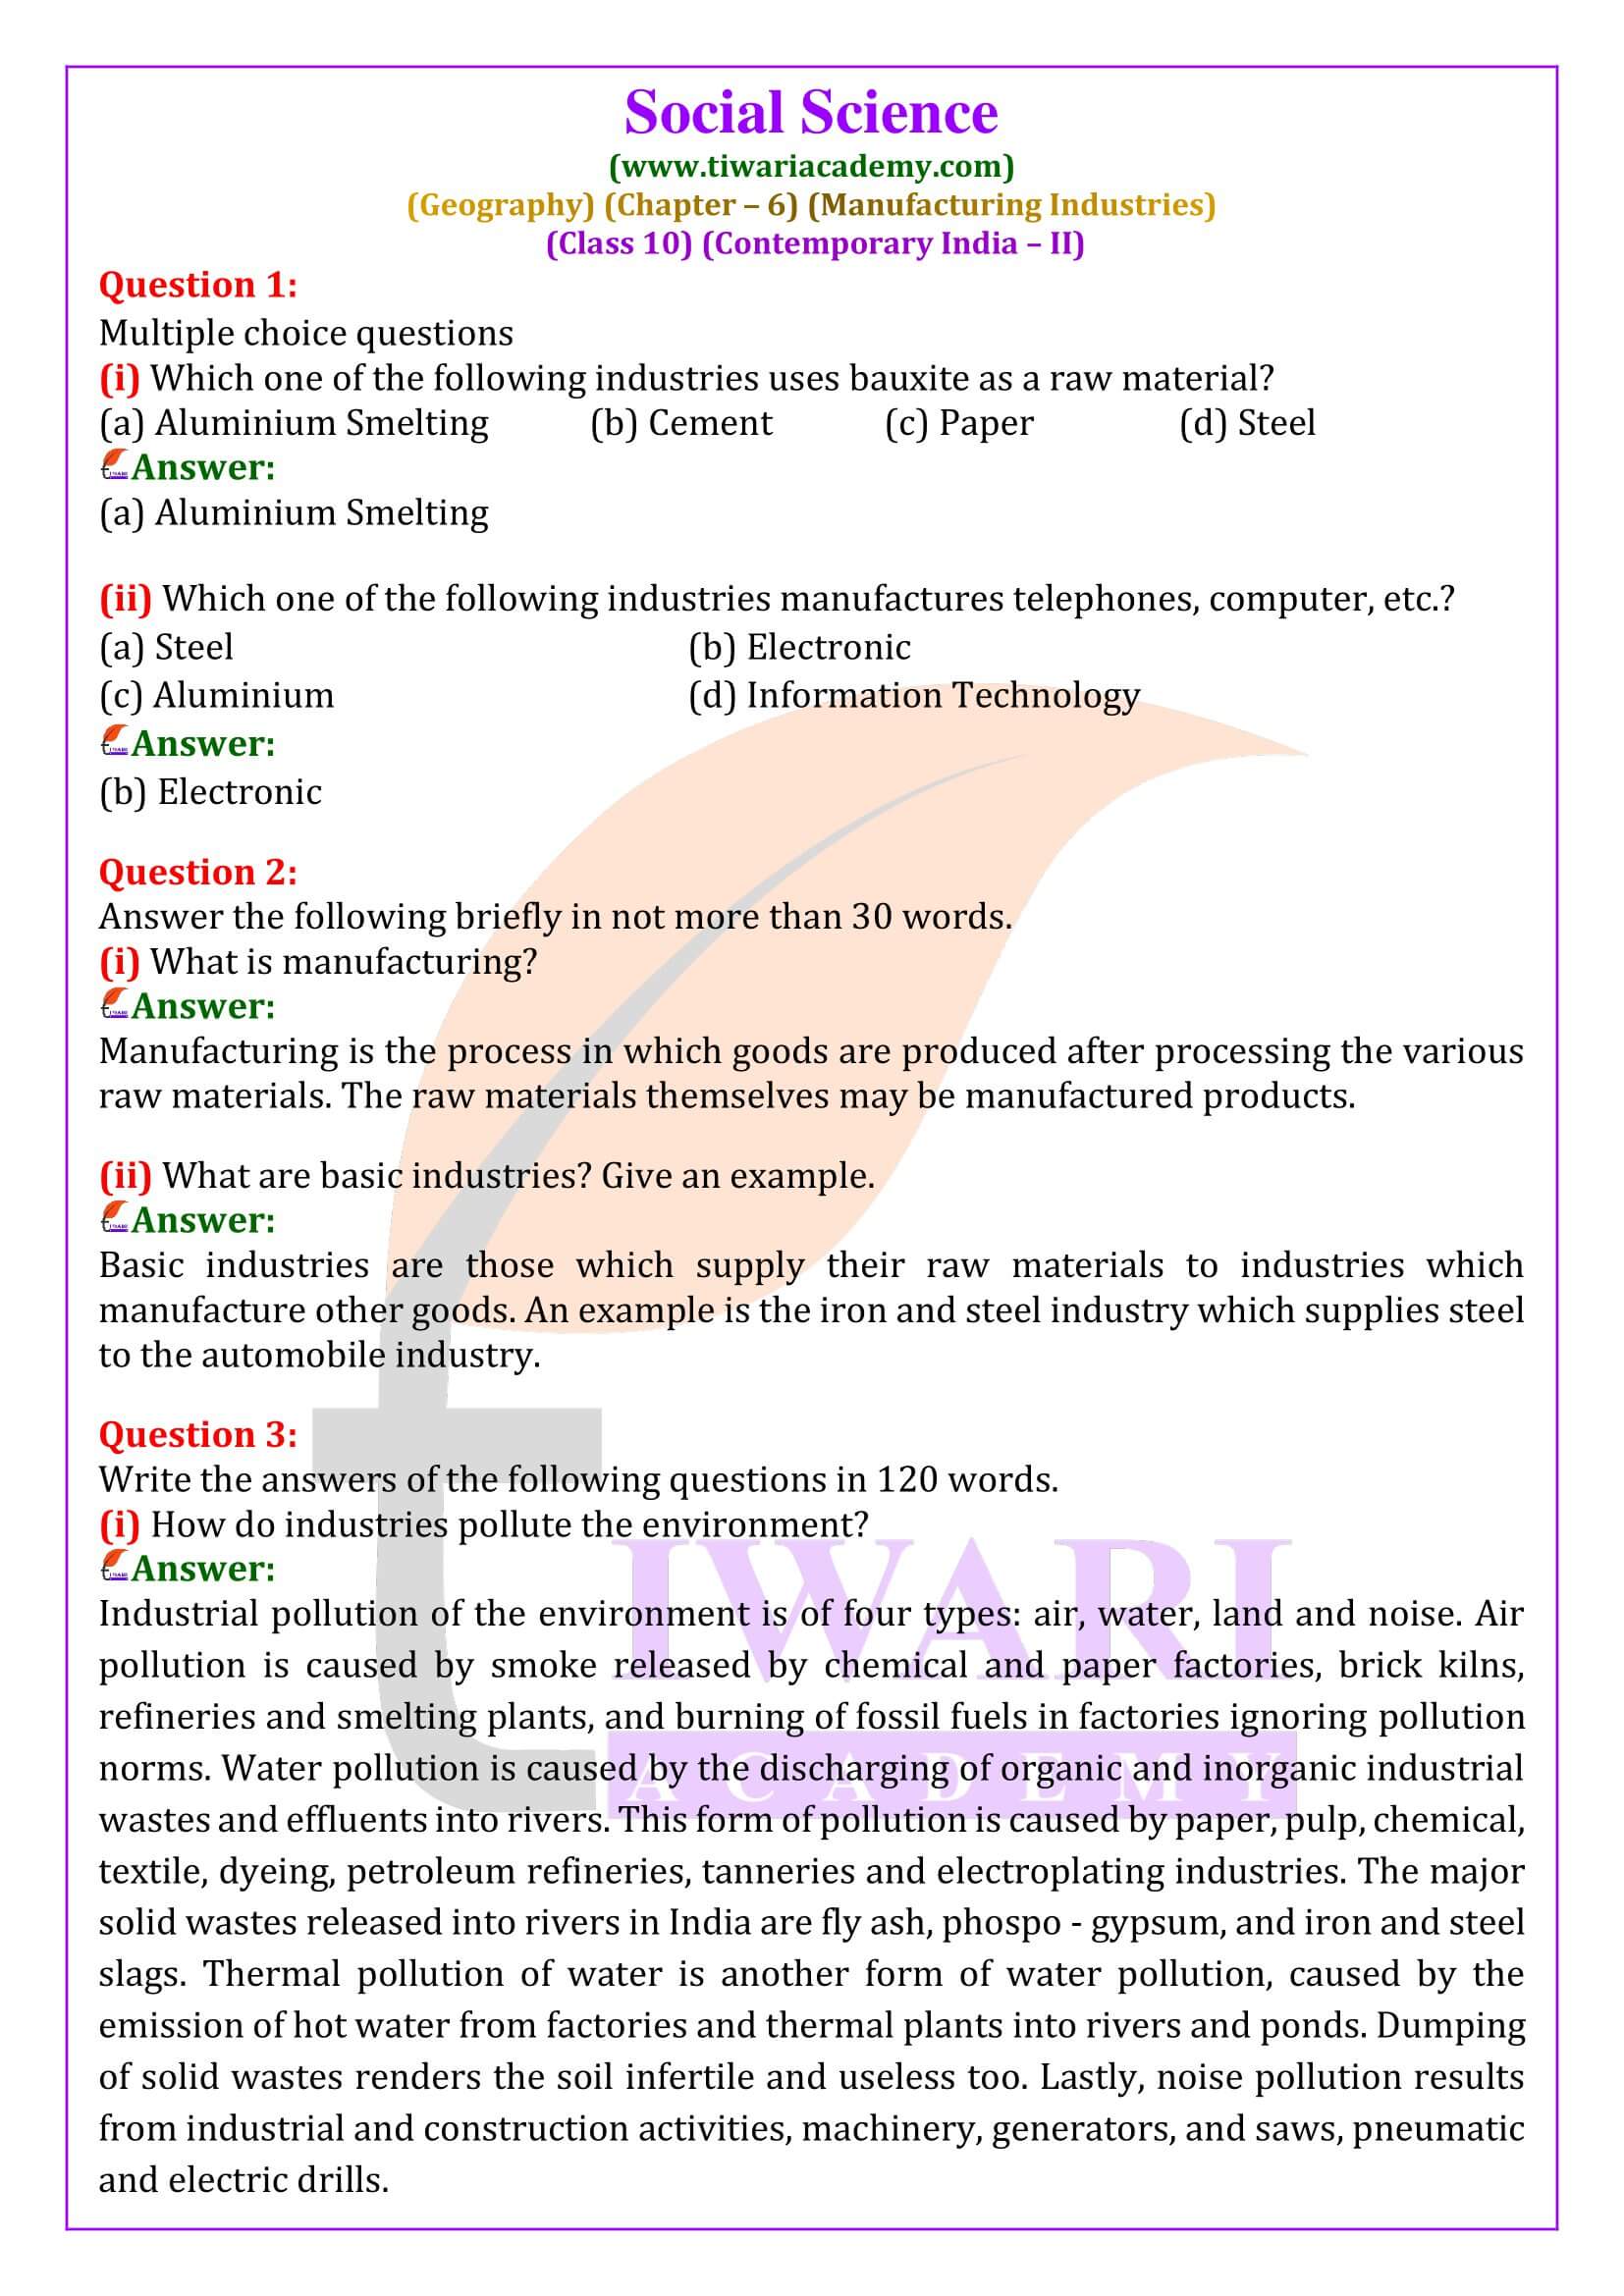 Class 10 Geography Chapter 6 Manufacturing Industries